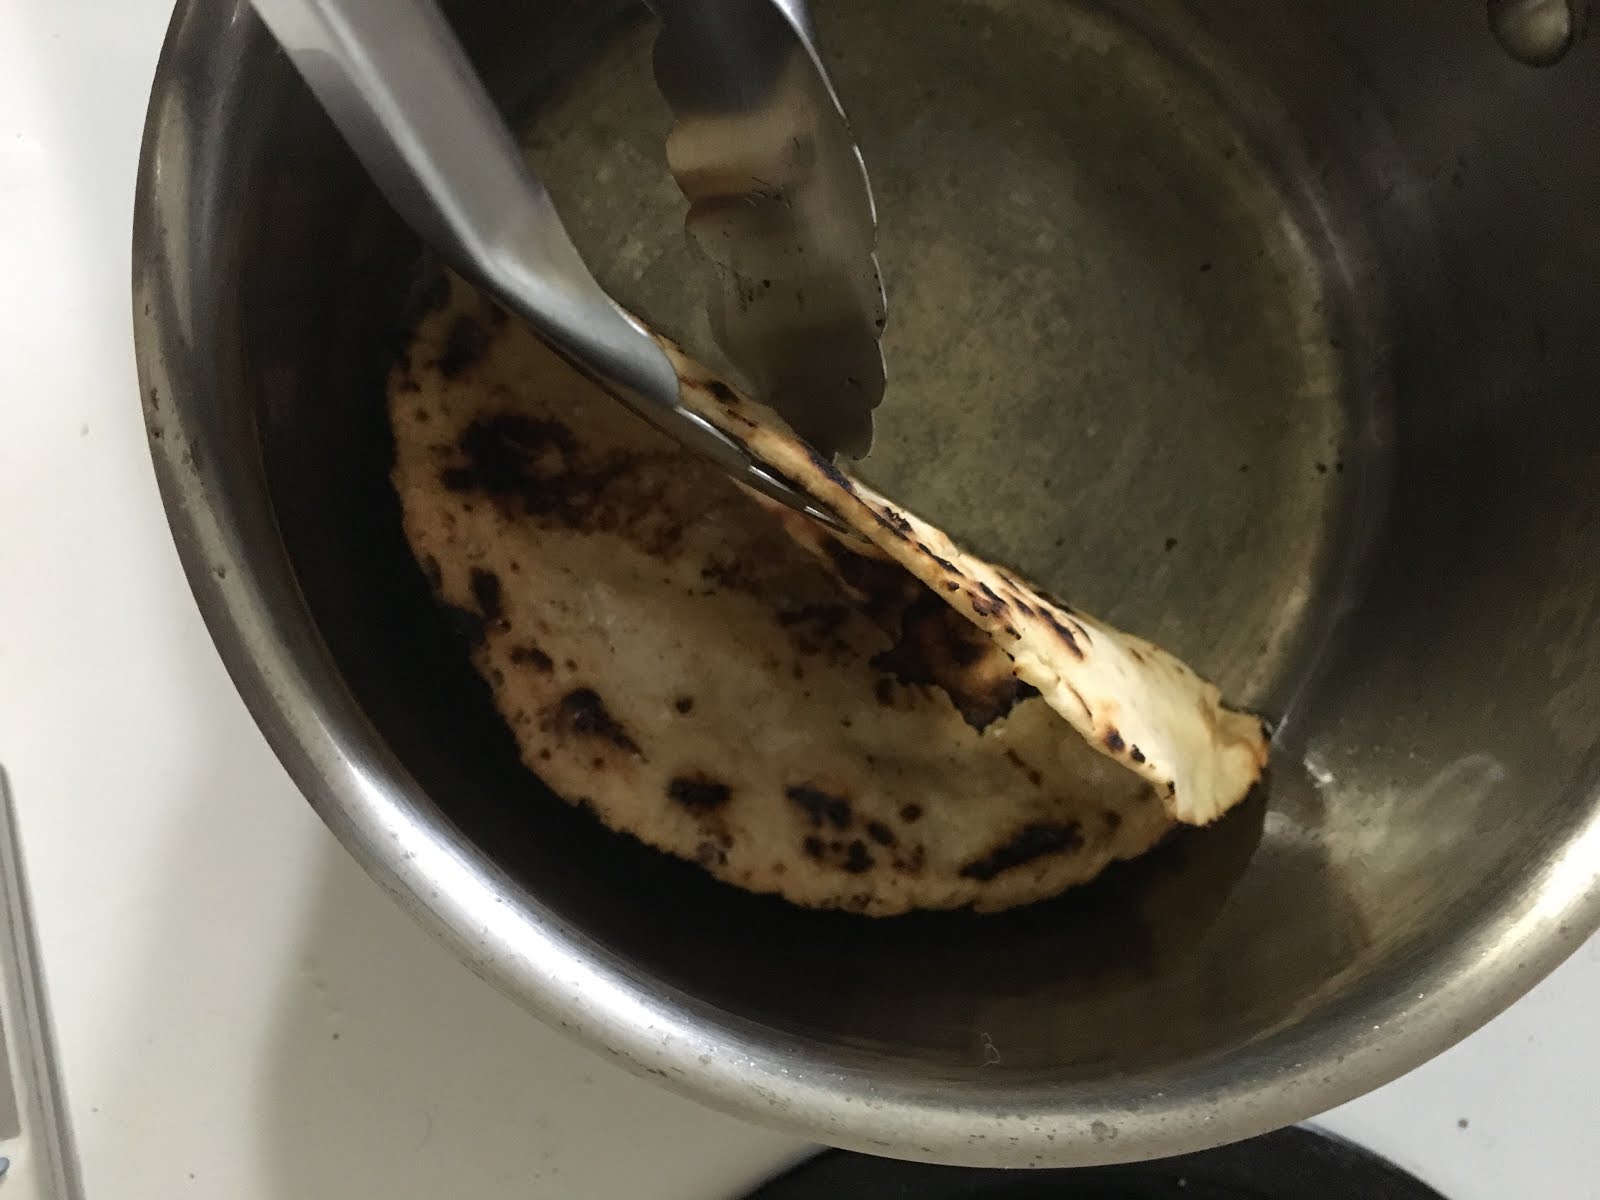 I use the corner of the pot to hold the tortilla in shape.